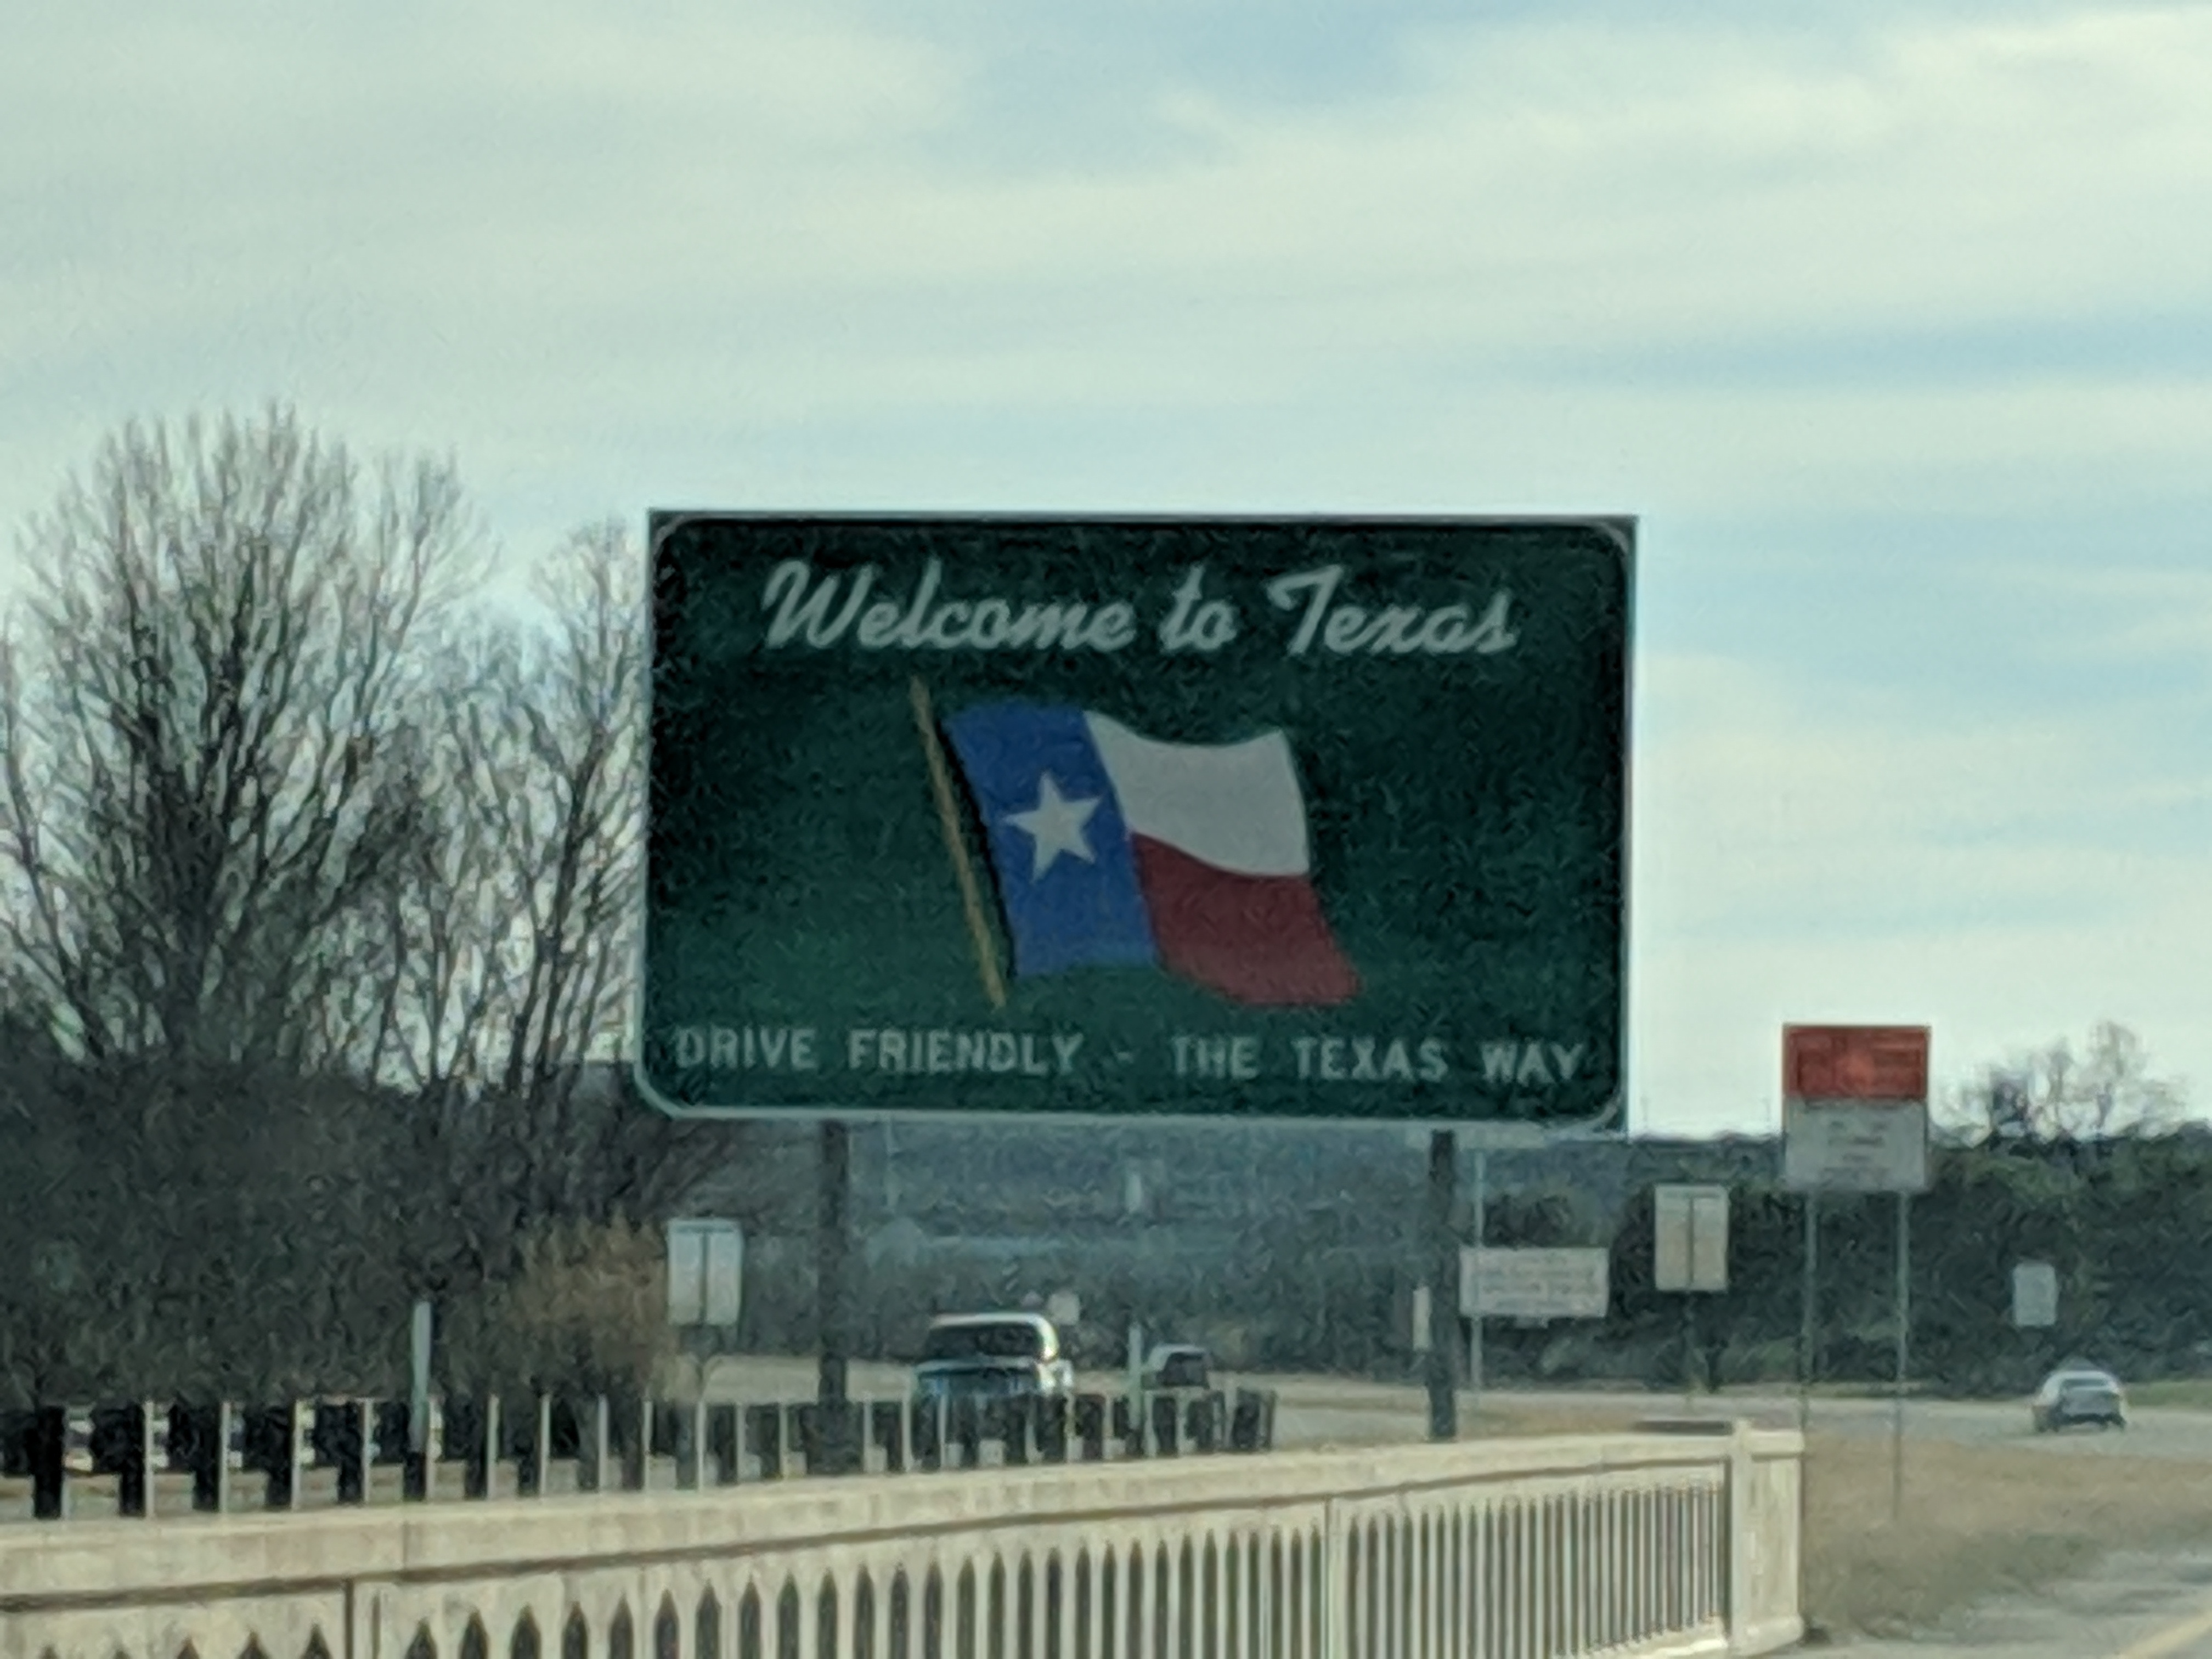 Back in Texas!